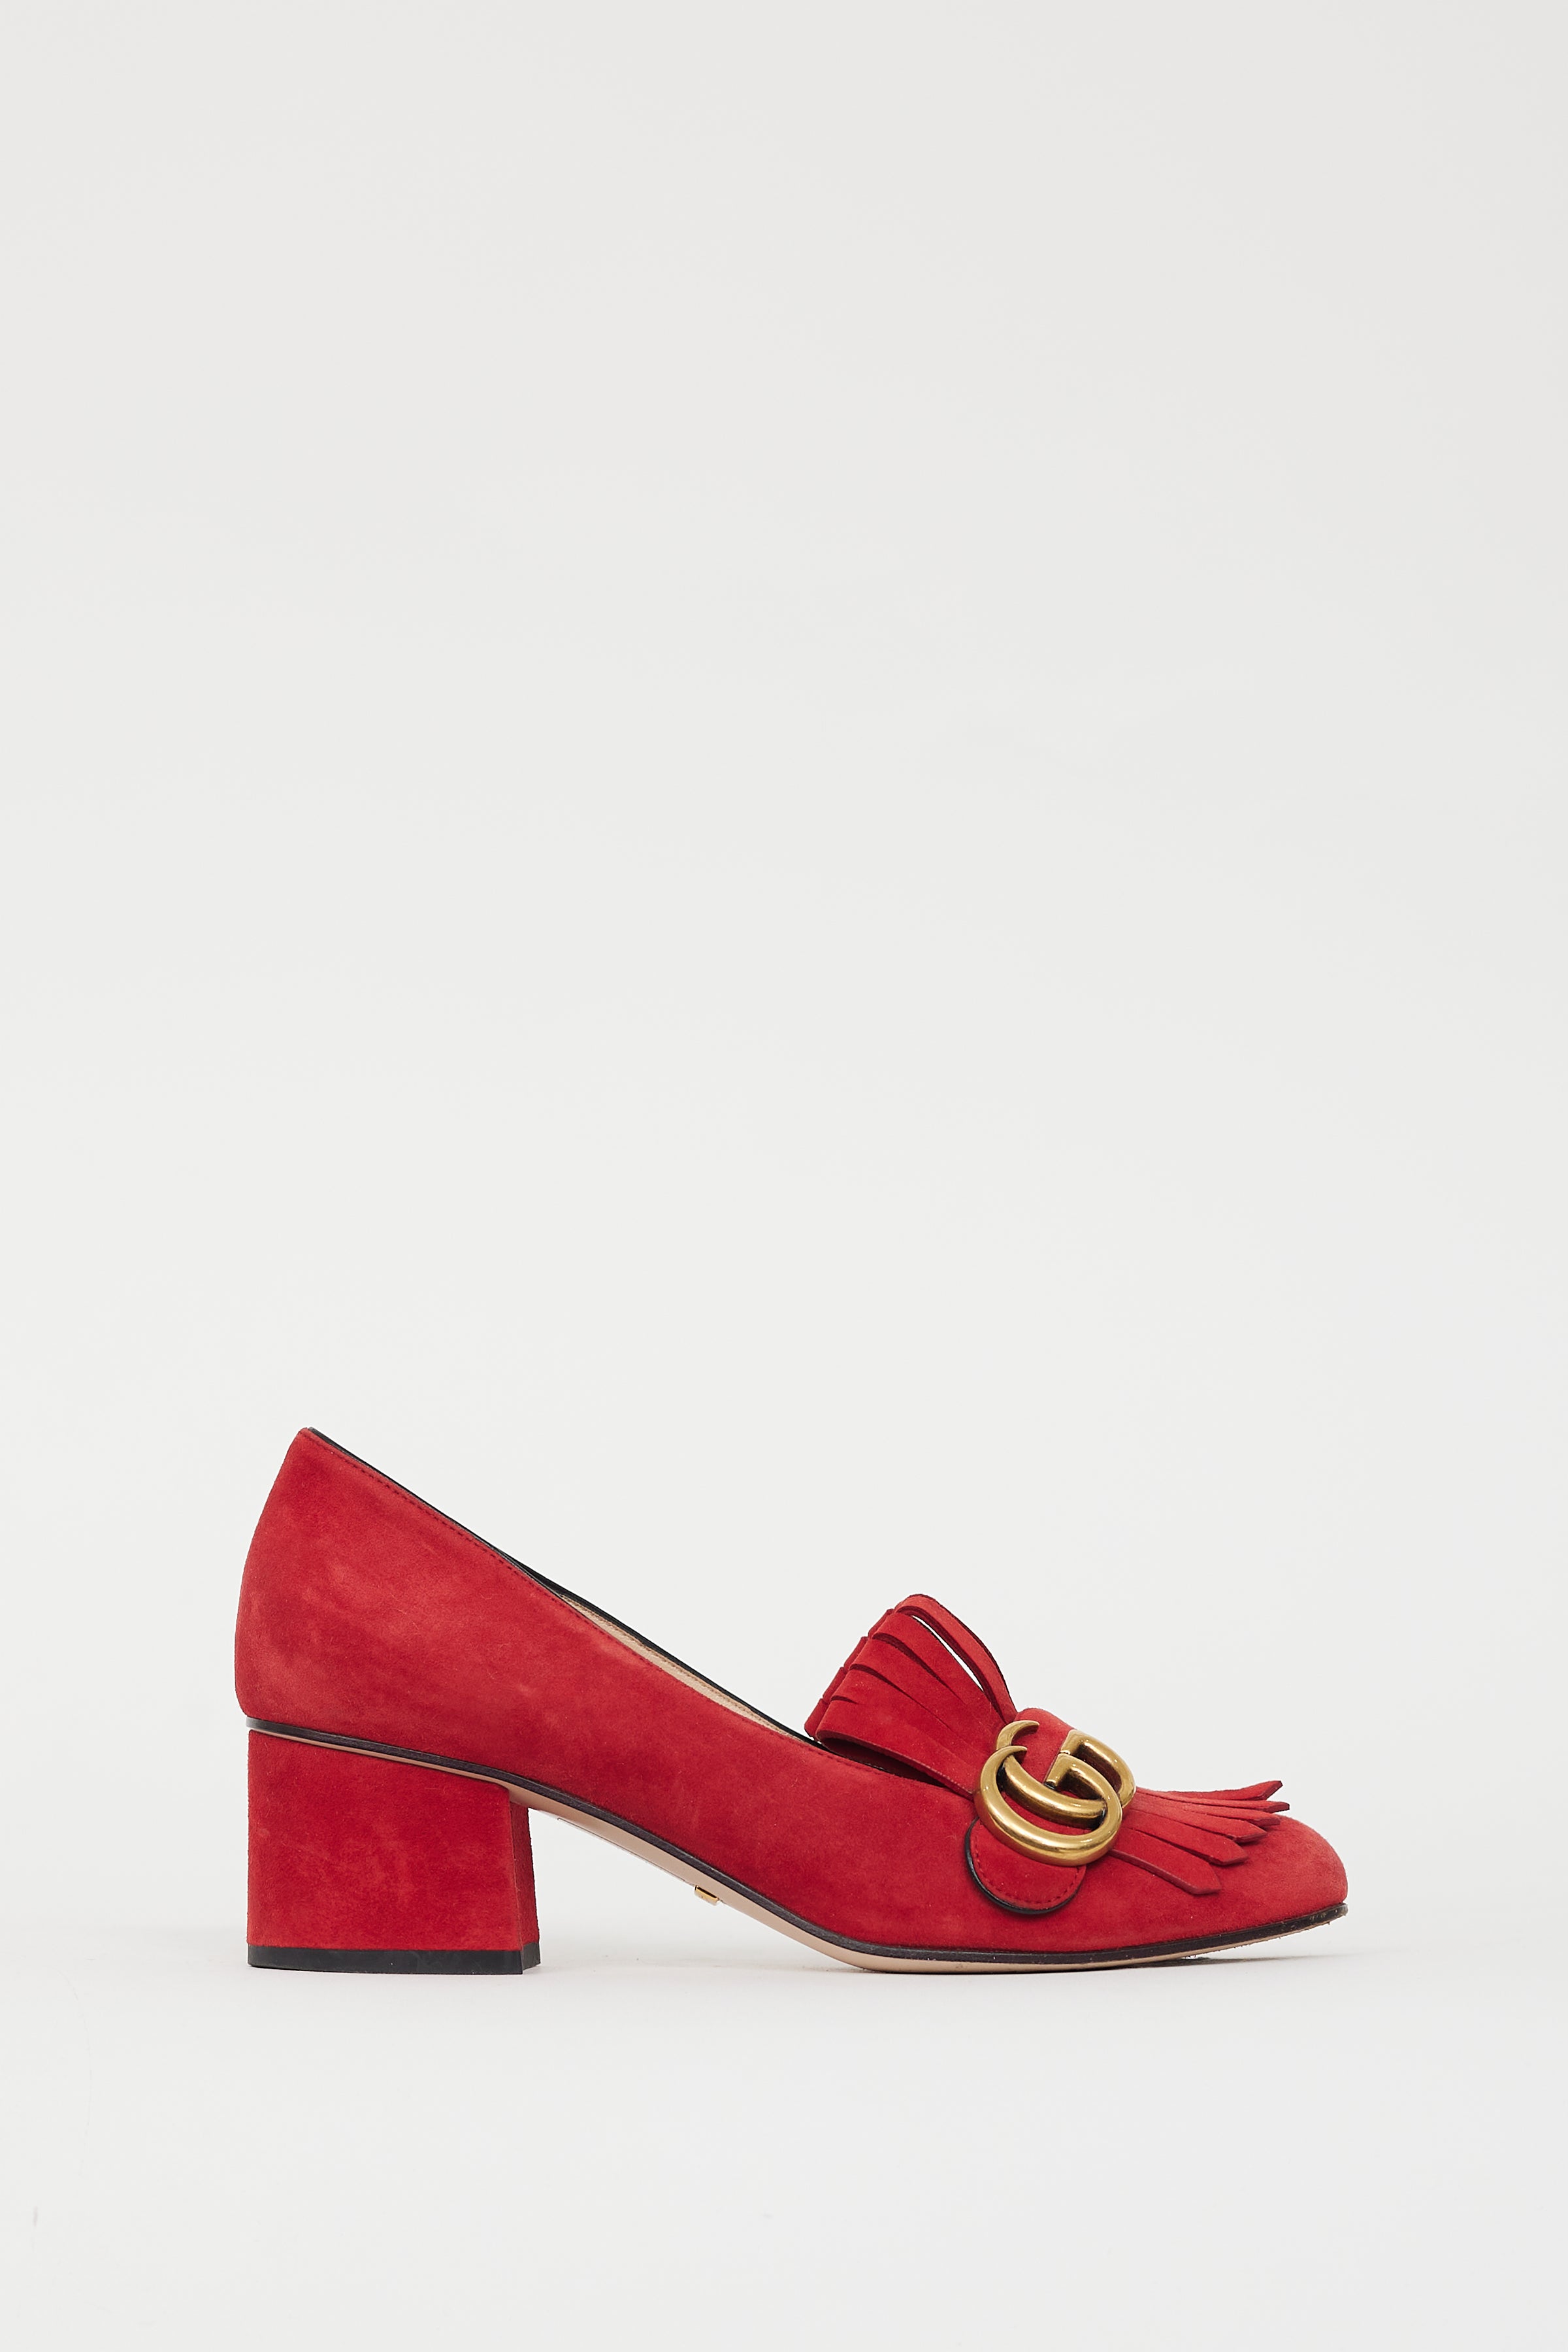 Tod's Mixed Leather Heeled Loafers - Bergdorf Goodman